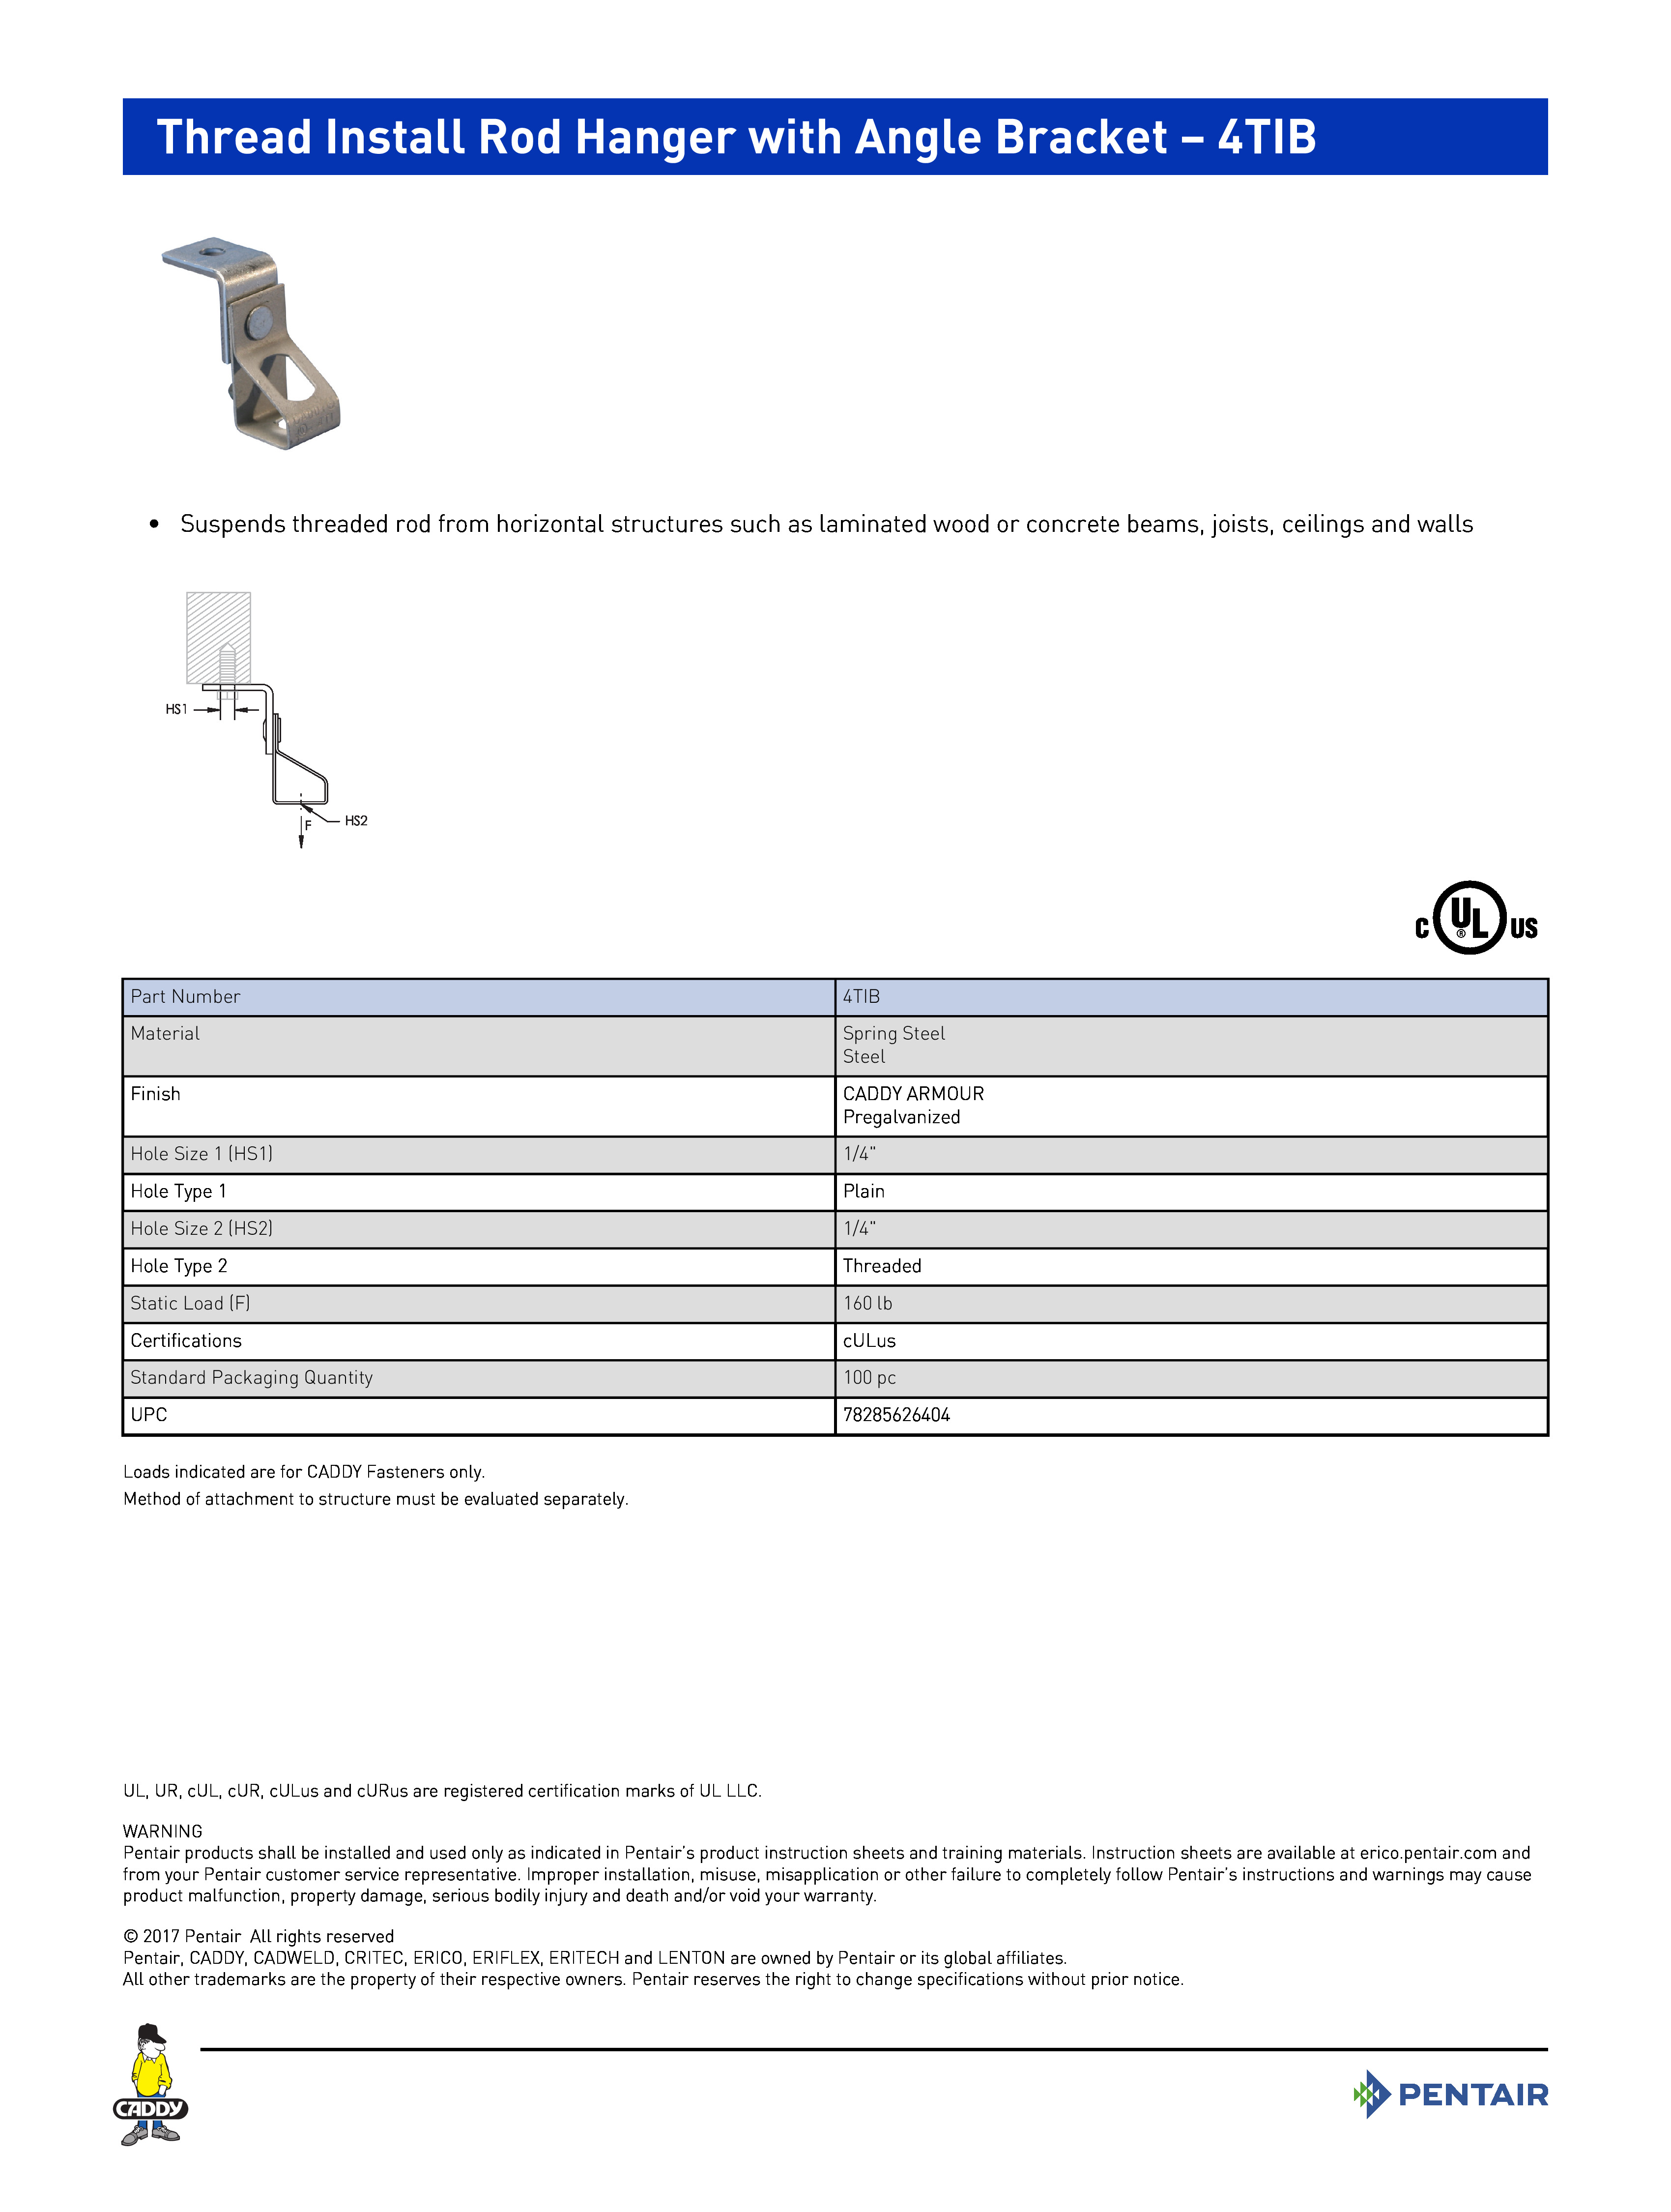 Thread Install Rod Hanger with Angle Bracket – 4TIB
•	Suspends threaded rod from horizontal structures such as laminated wood or concrete beams, joists, ceilings and walls	
Part Number4TIBMaterialSpring SteelSteelFinishCADDY ARMOURPregalvanizedHole Size 1 (HS1)1/4"Hole Type 1PlainHole Size 2 (HS2)1/4"Hole Type 2ThreadedStatic Load (F)160 lbCertificationscULusStandard Packaging Quantity100 pcUPC78285626404
Loads indicated are for CADDY Fasteners only.Method of attachment to structure must be evaluated separately.
UL, UR, cUL, cUR, cULus and cURus are registered certification marks of UL LLC. WARNINGPentair products shall be installed and used only as indicated in Pentair’s product instruction sheets and training materials. Instruction sheets are available at erico.pentair.com andfrom your Pentair customer service representative. Improper installation, misuse, misapplication or other failure to completely follow Pentair’s instructions and warnings may causeproduct malfunction, property damage, serious bodily injury and death and/or void your warranty. 